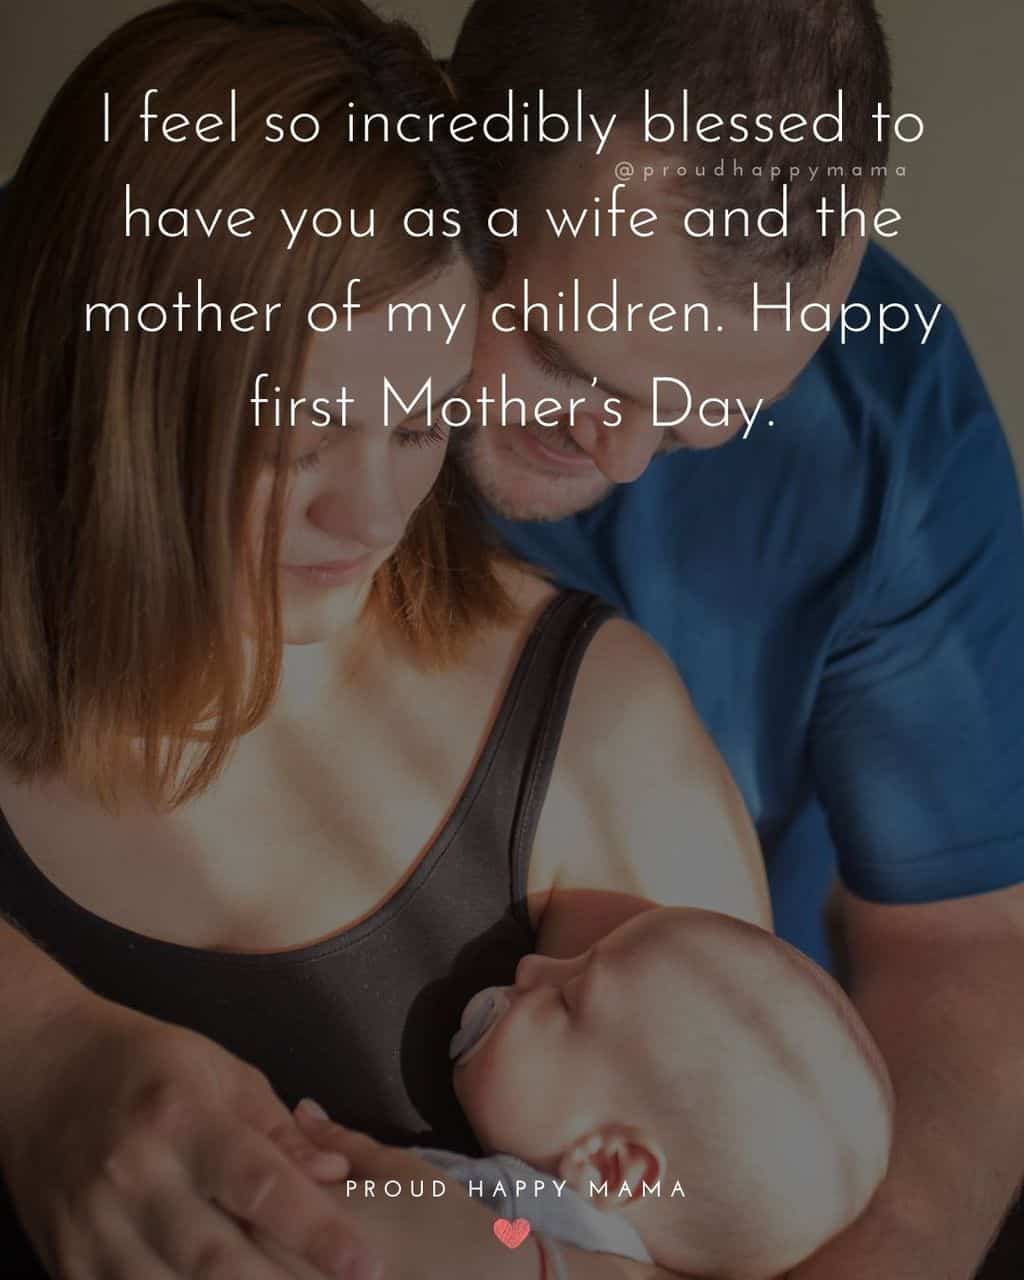 First Mothers Day Quotes - I feel so incredibly blessed to have you as a wife and the mother of my children. Happy first Mother’s Day.’